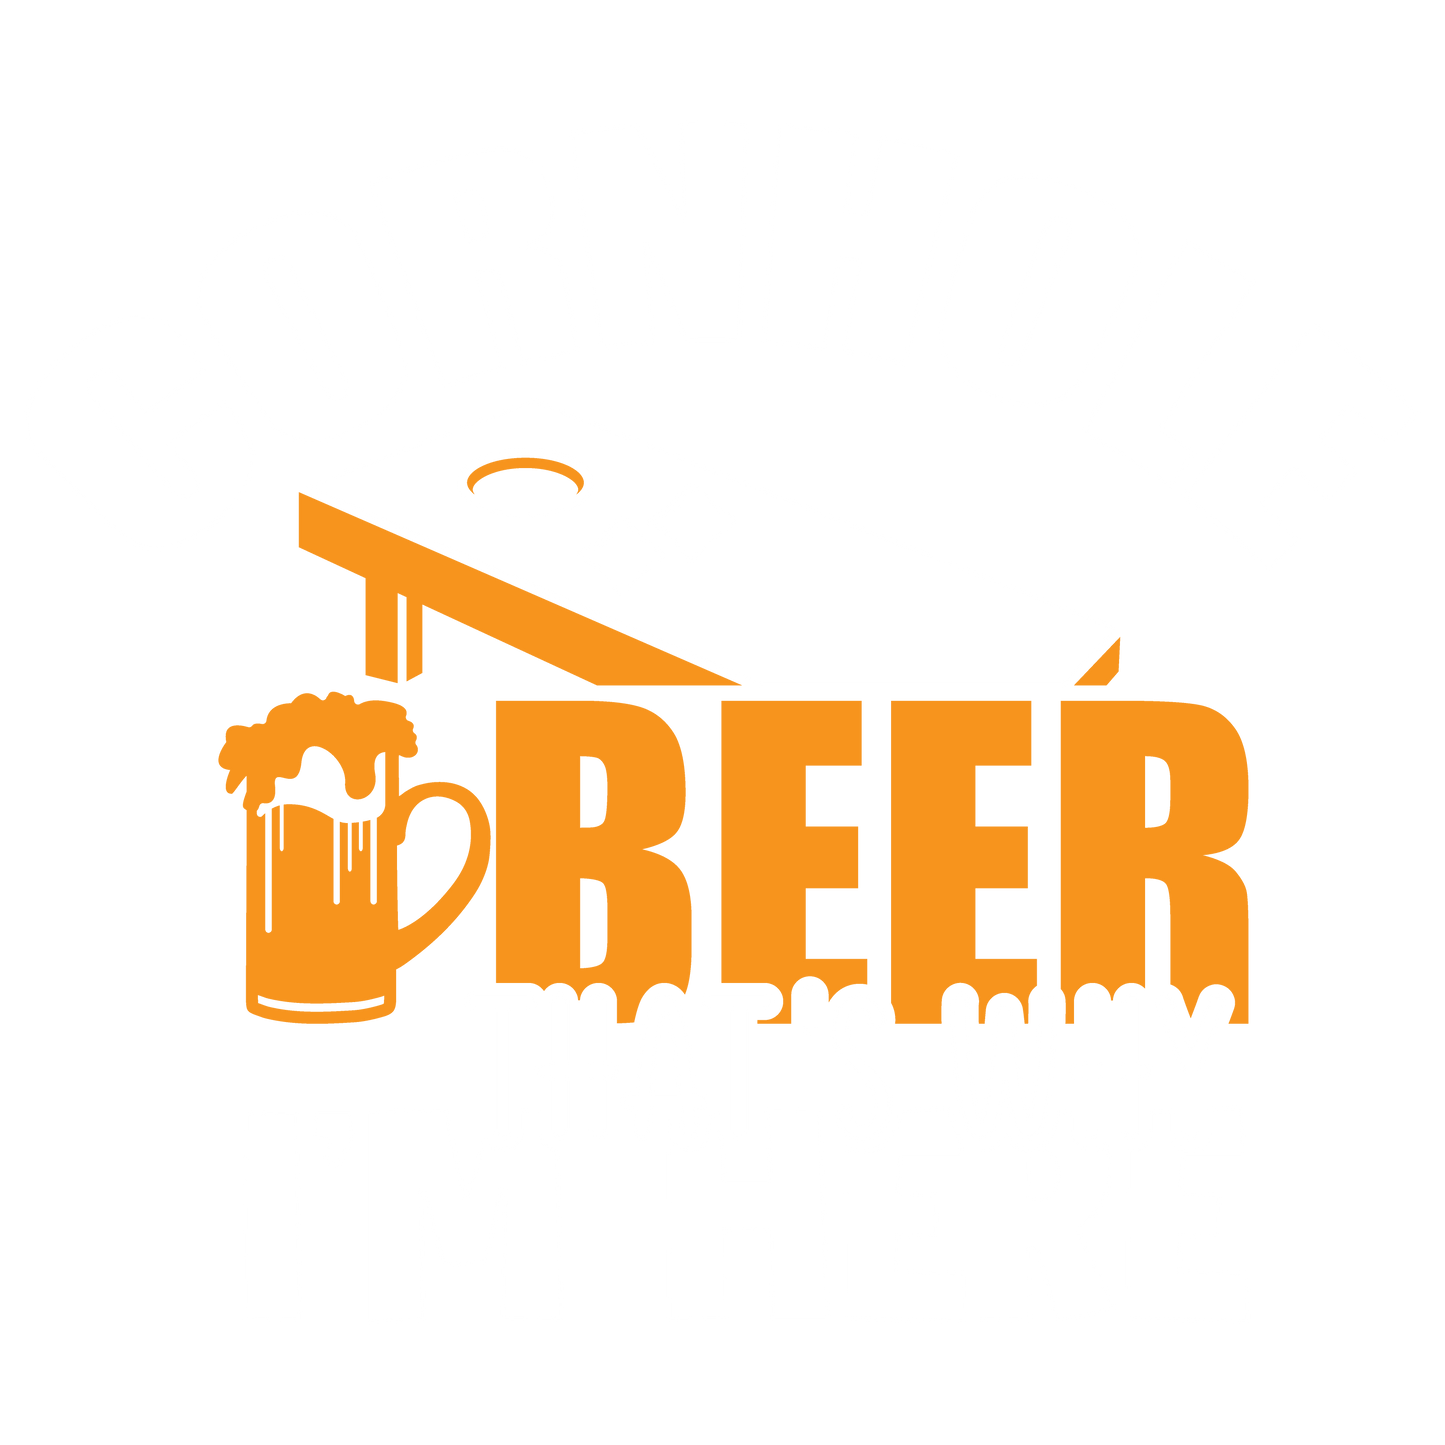 Cornhole Beer, That’s Why I am here